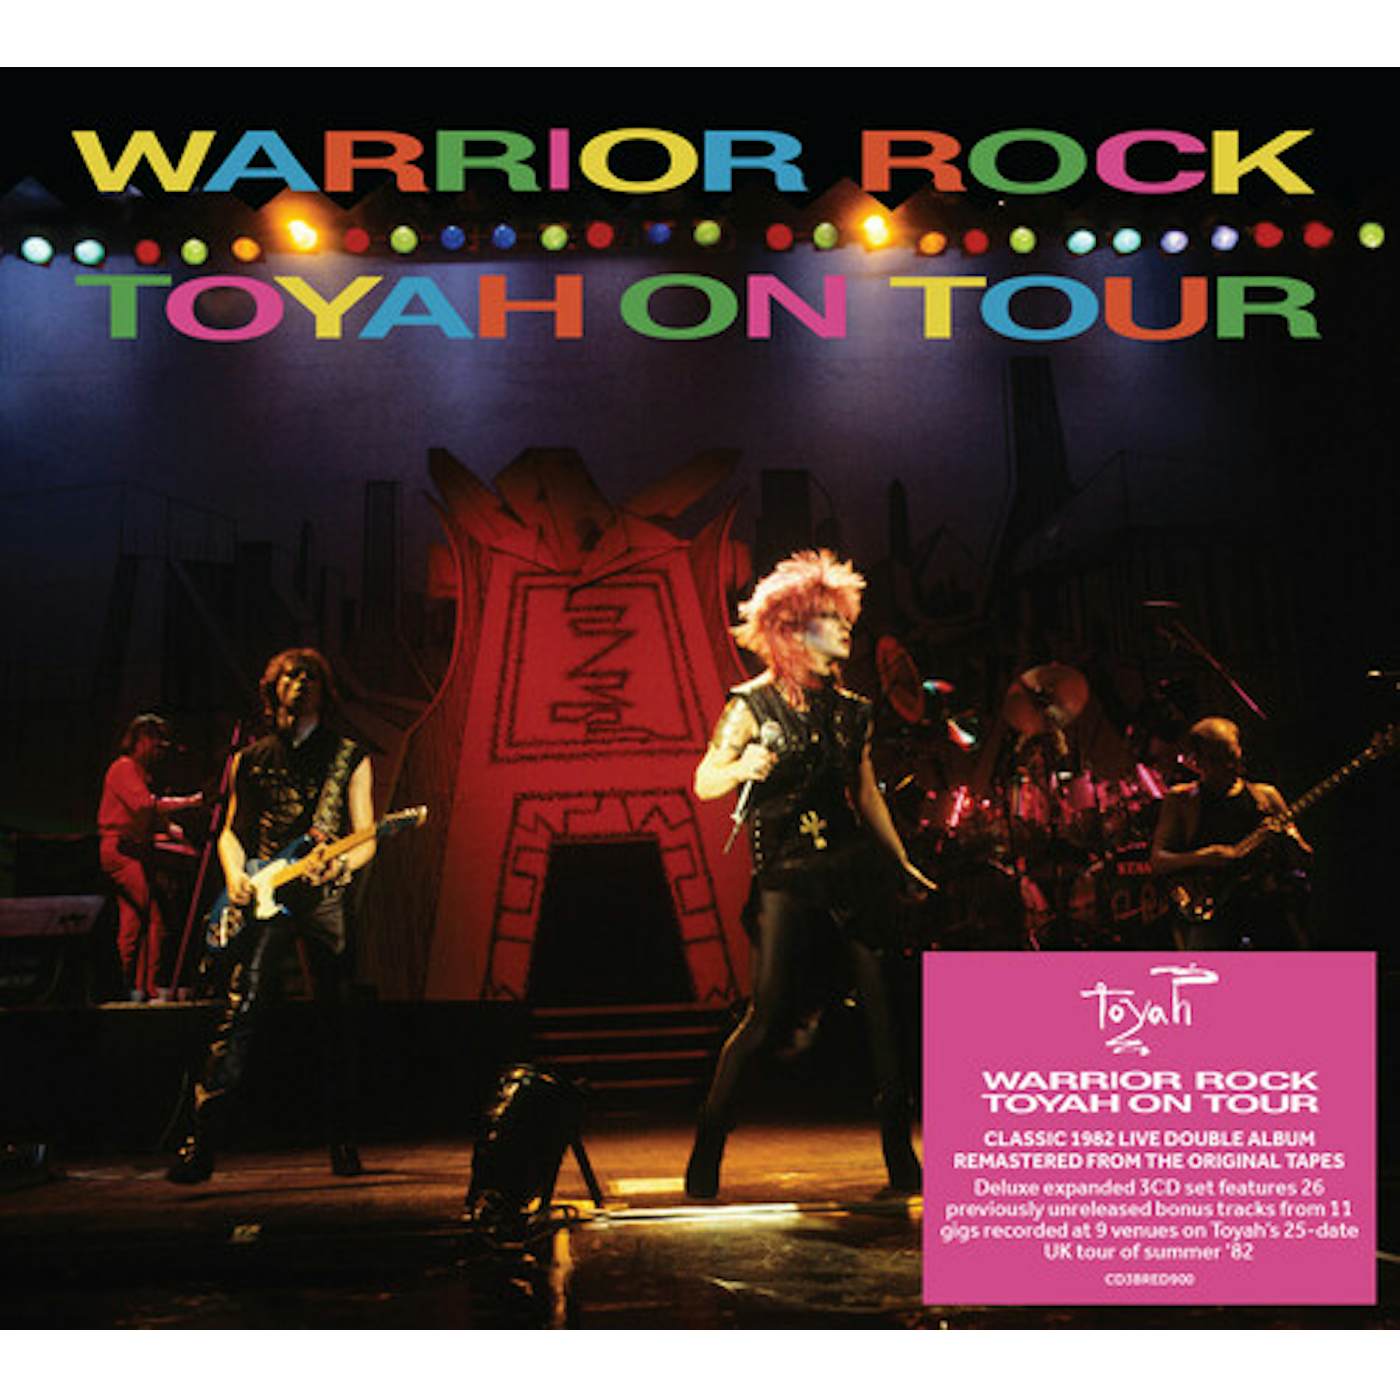 WARRIOR ROCK - TOYAH ON TOUR - EXPANDED EDITION CD